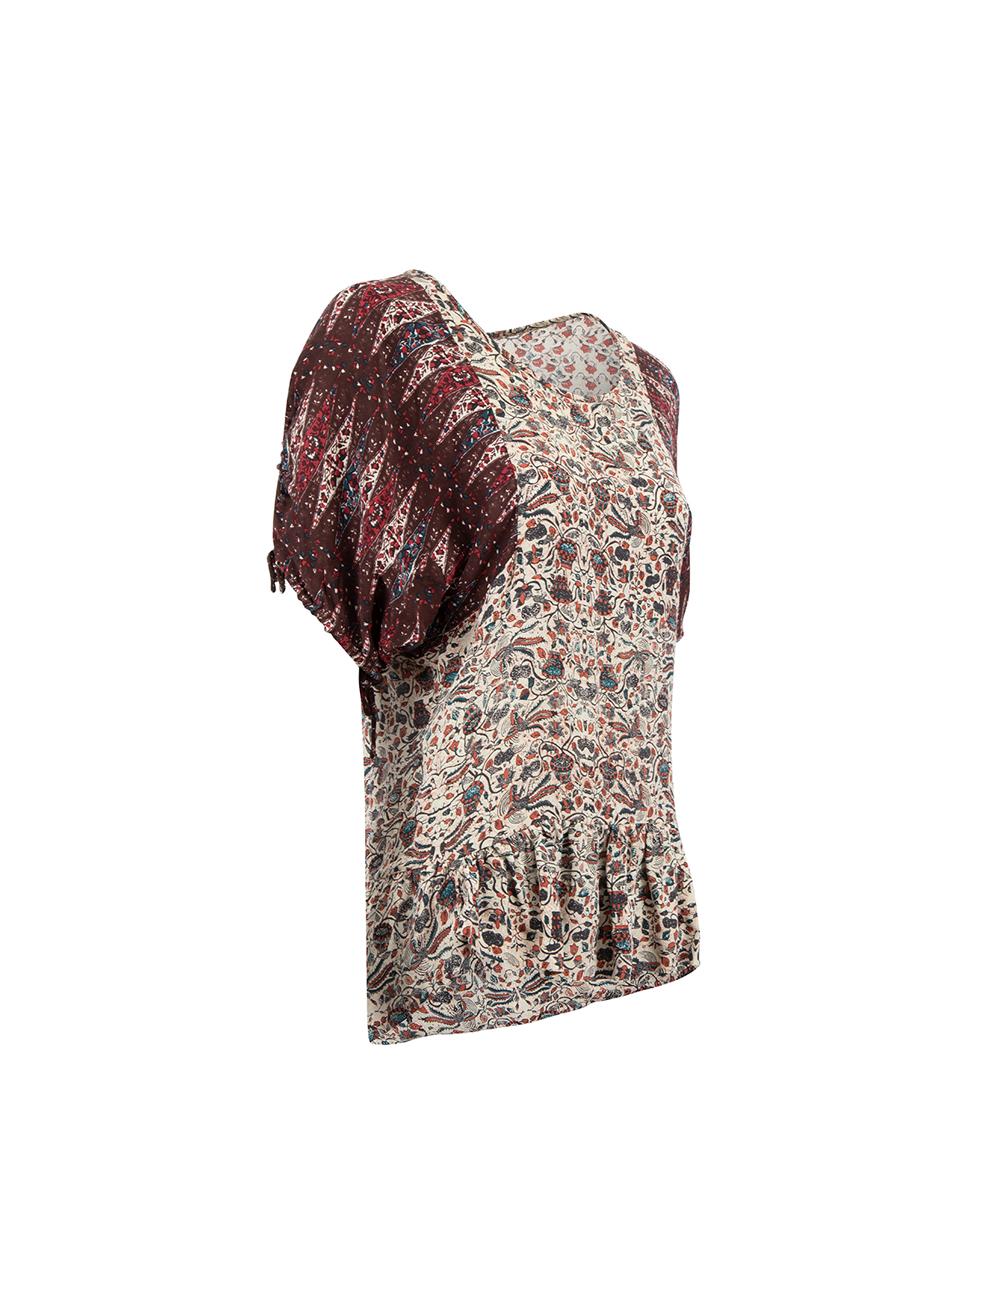 CONDITION is Very good. Hardly any visible wear to top is evident on this used Isabel Marant Étoile designer resale item. 
 
 Details
  Burgundy tone
 Silk
 Peplum top
 Graphic printed pattern
 Round neckline
 Short sleeves with slit and drawstring
